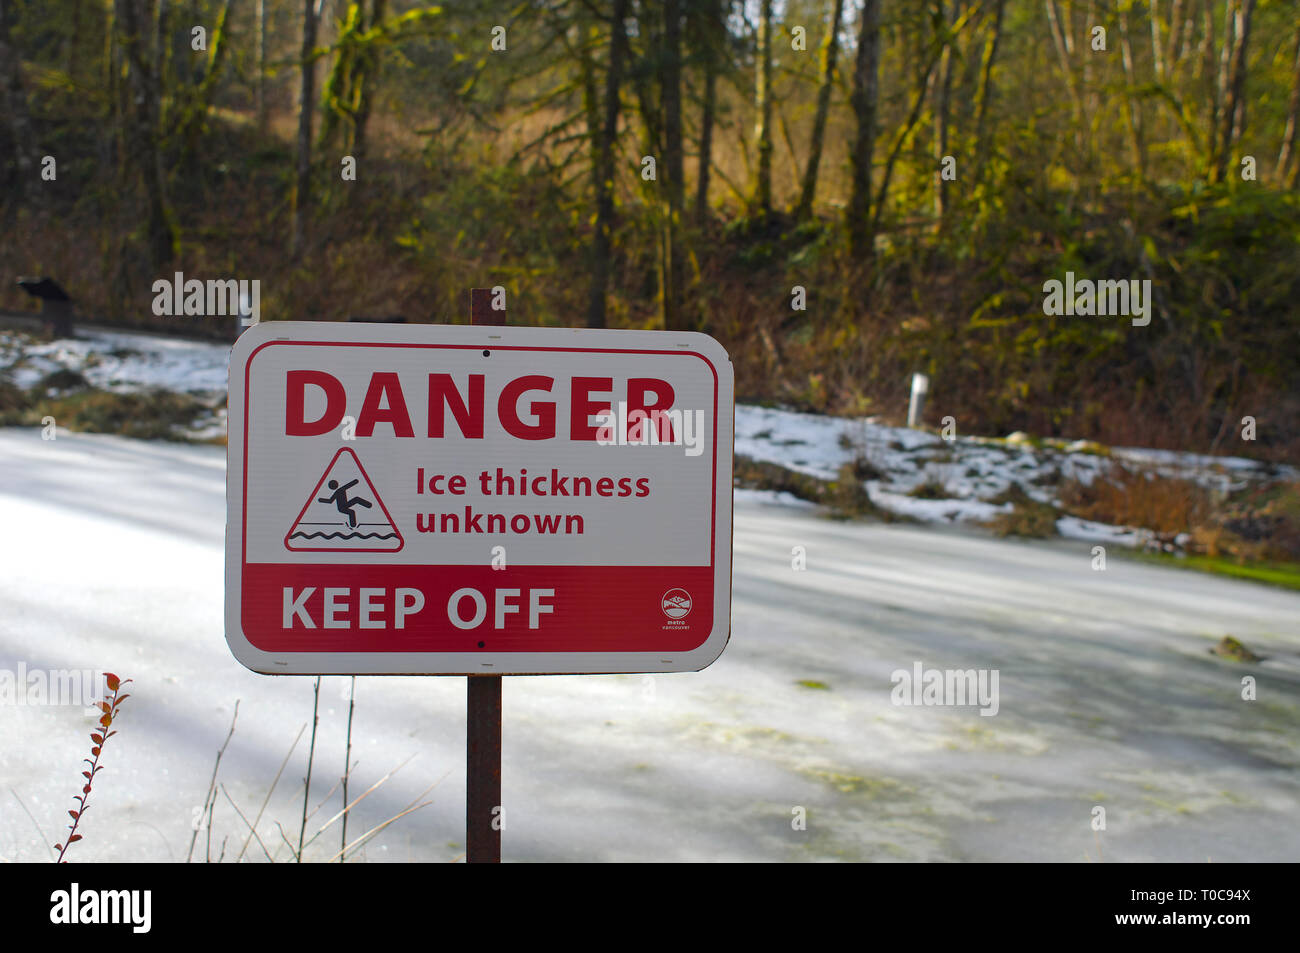 Danger Ice Thickness Unknown Keep Off warning sign beside an ice-covered pond with trees in the background. Stock Photo